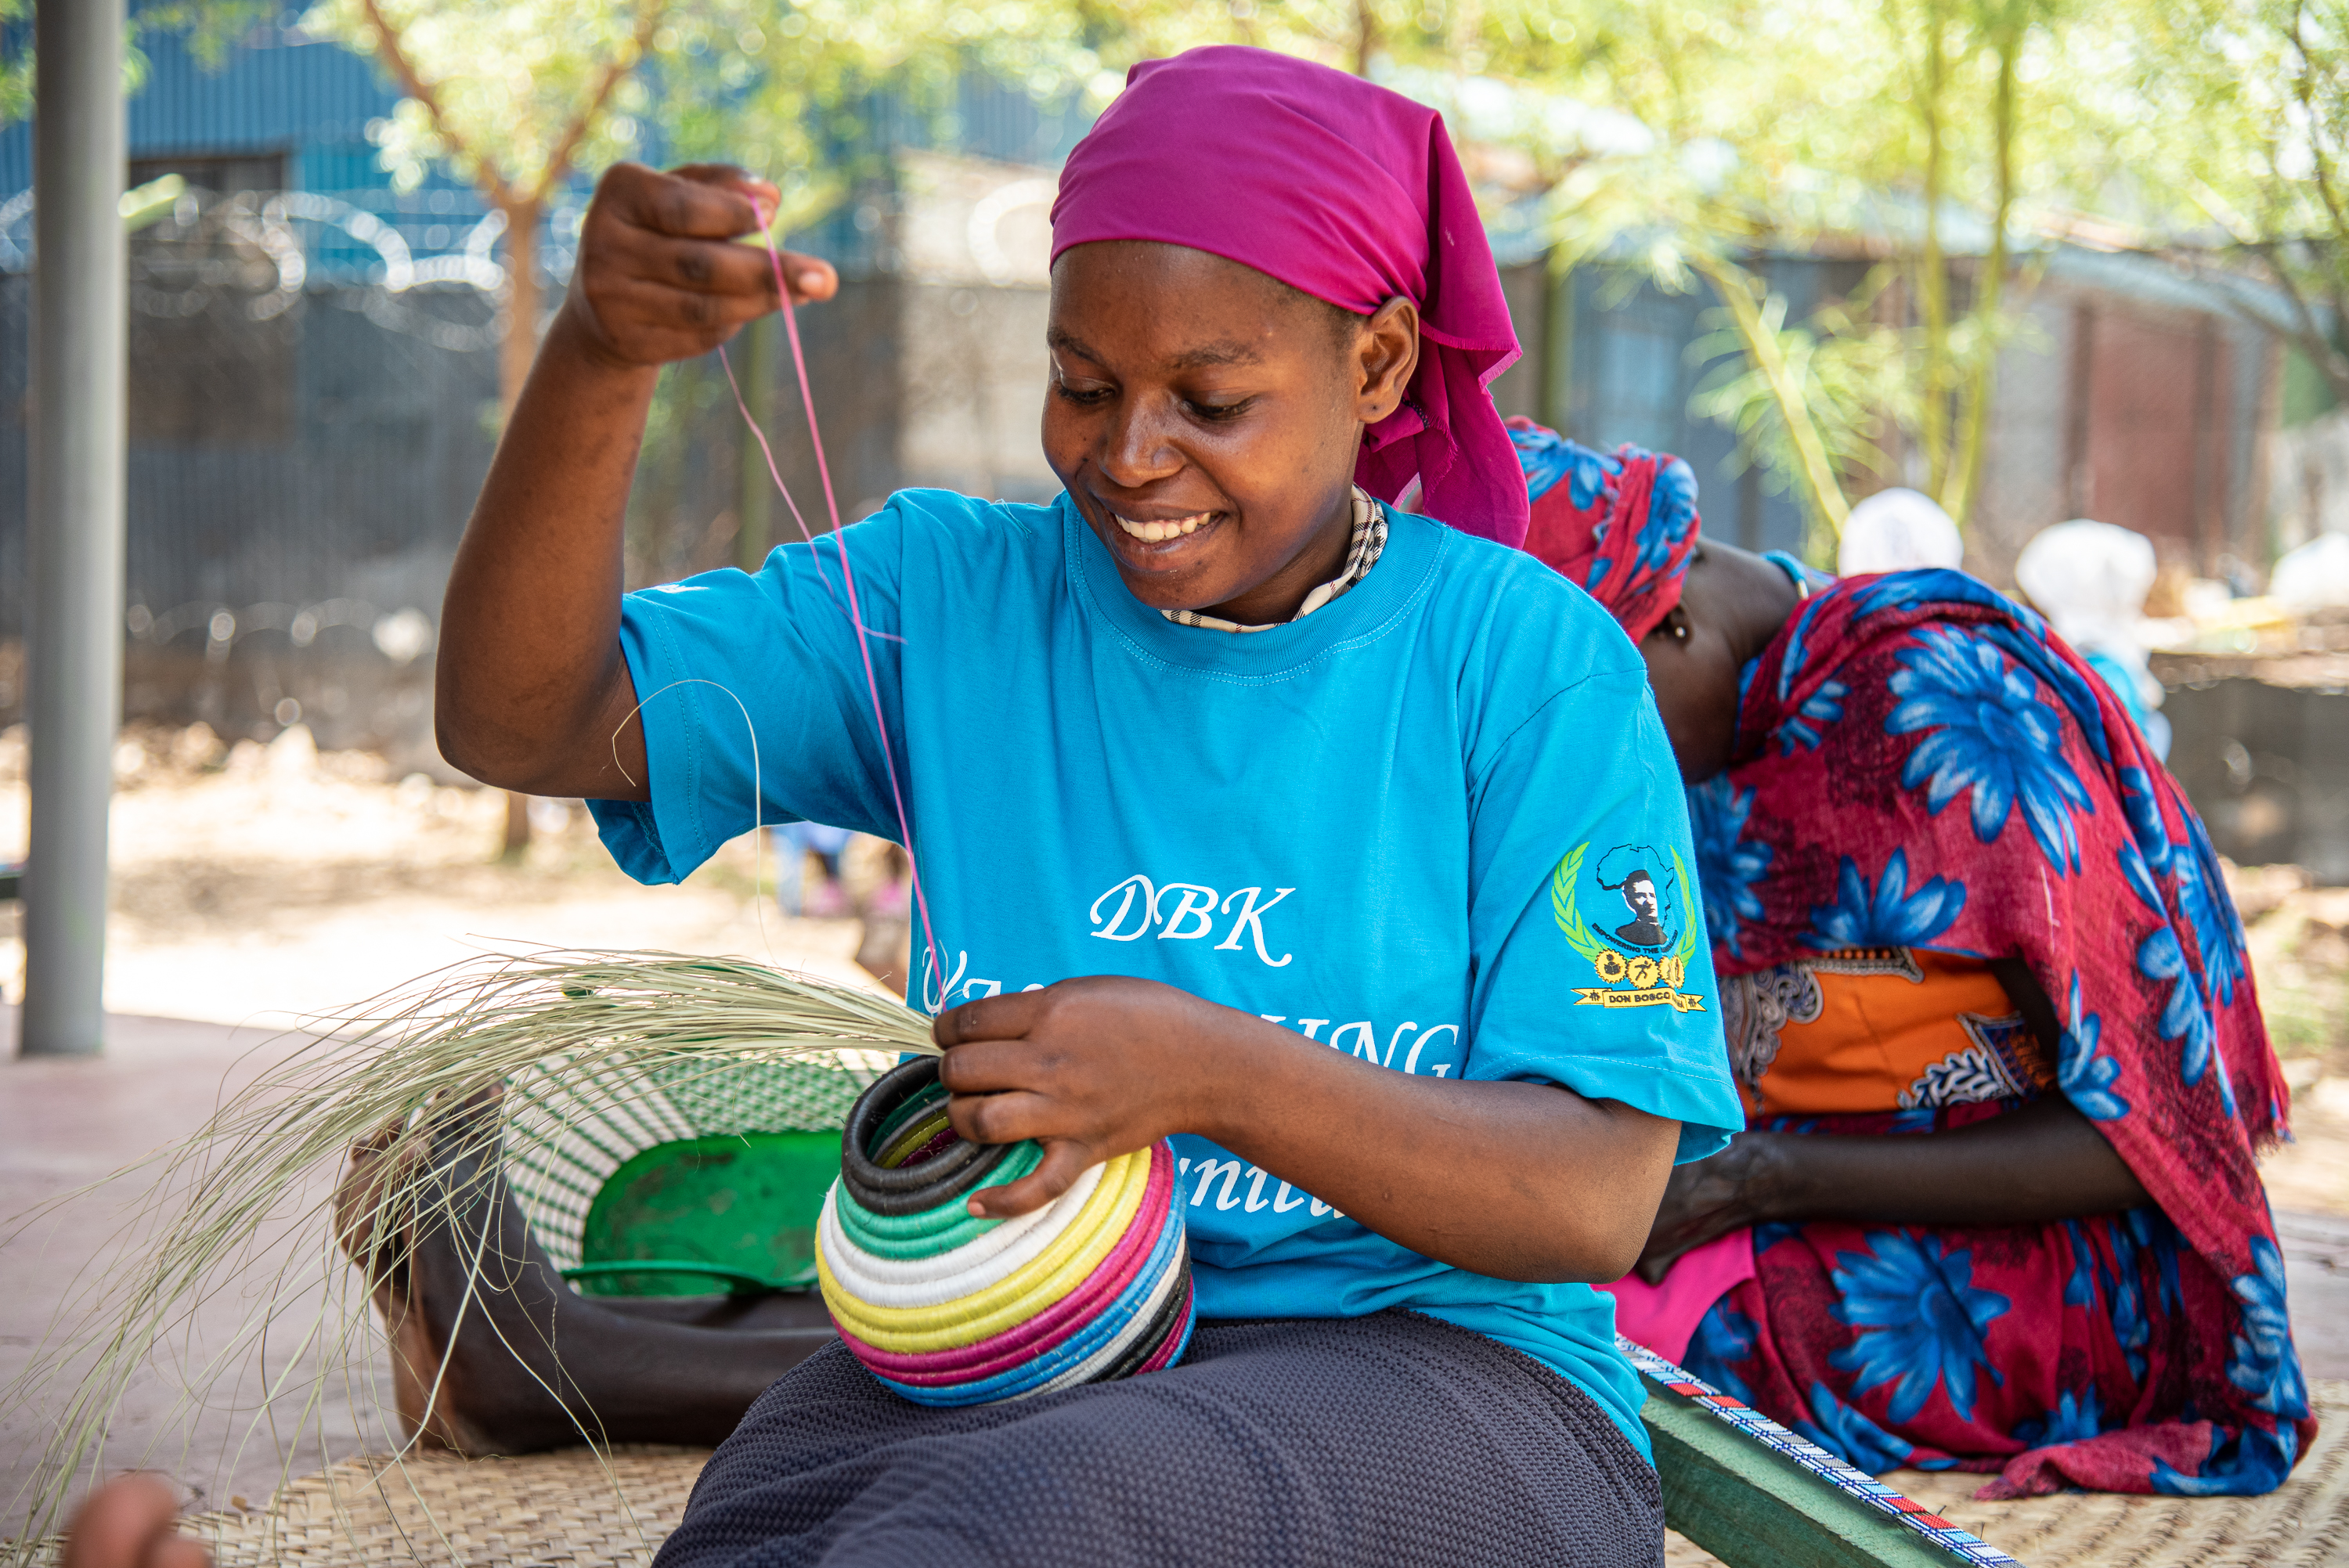   Jonanise, a beneficiary of the LEAP project, works on a basket at the Kalobeyei Business center. She received training on basket making through the project and her products are marketed at the center and through implementing partner Don Bosco's network of centers